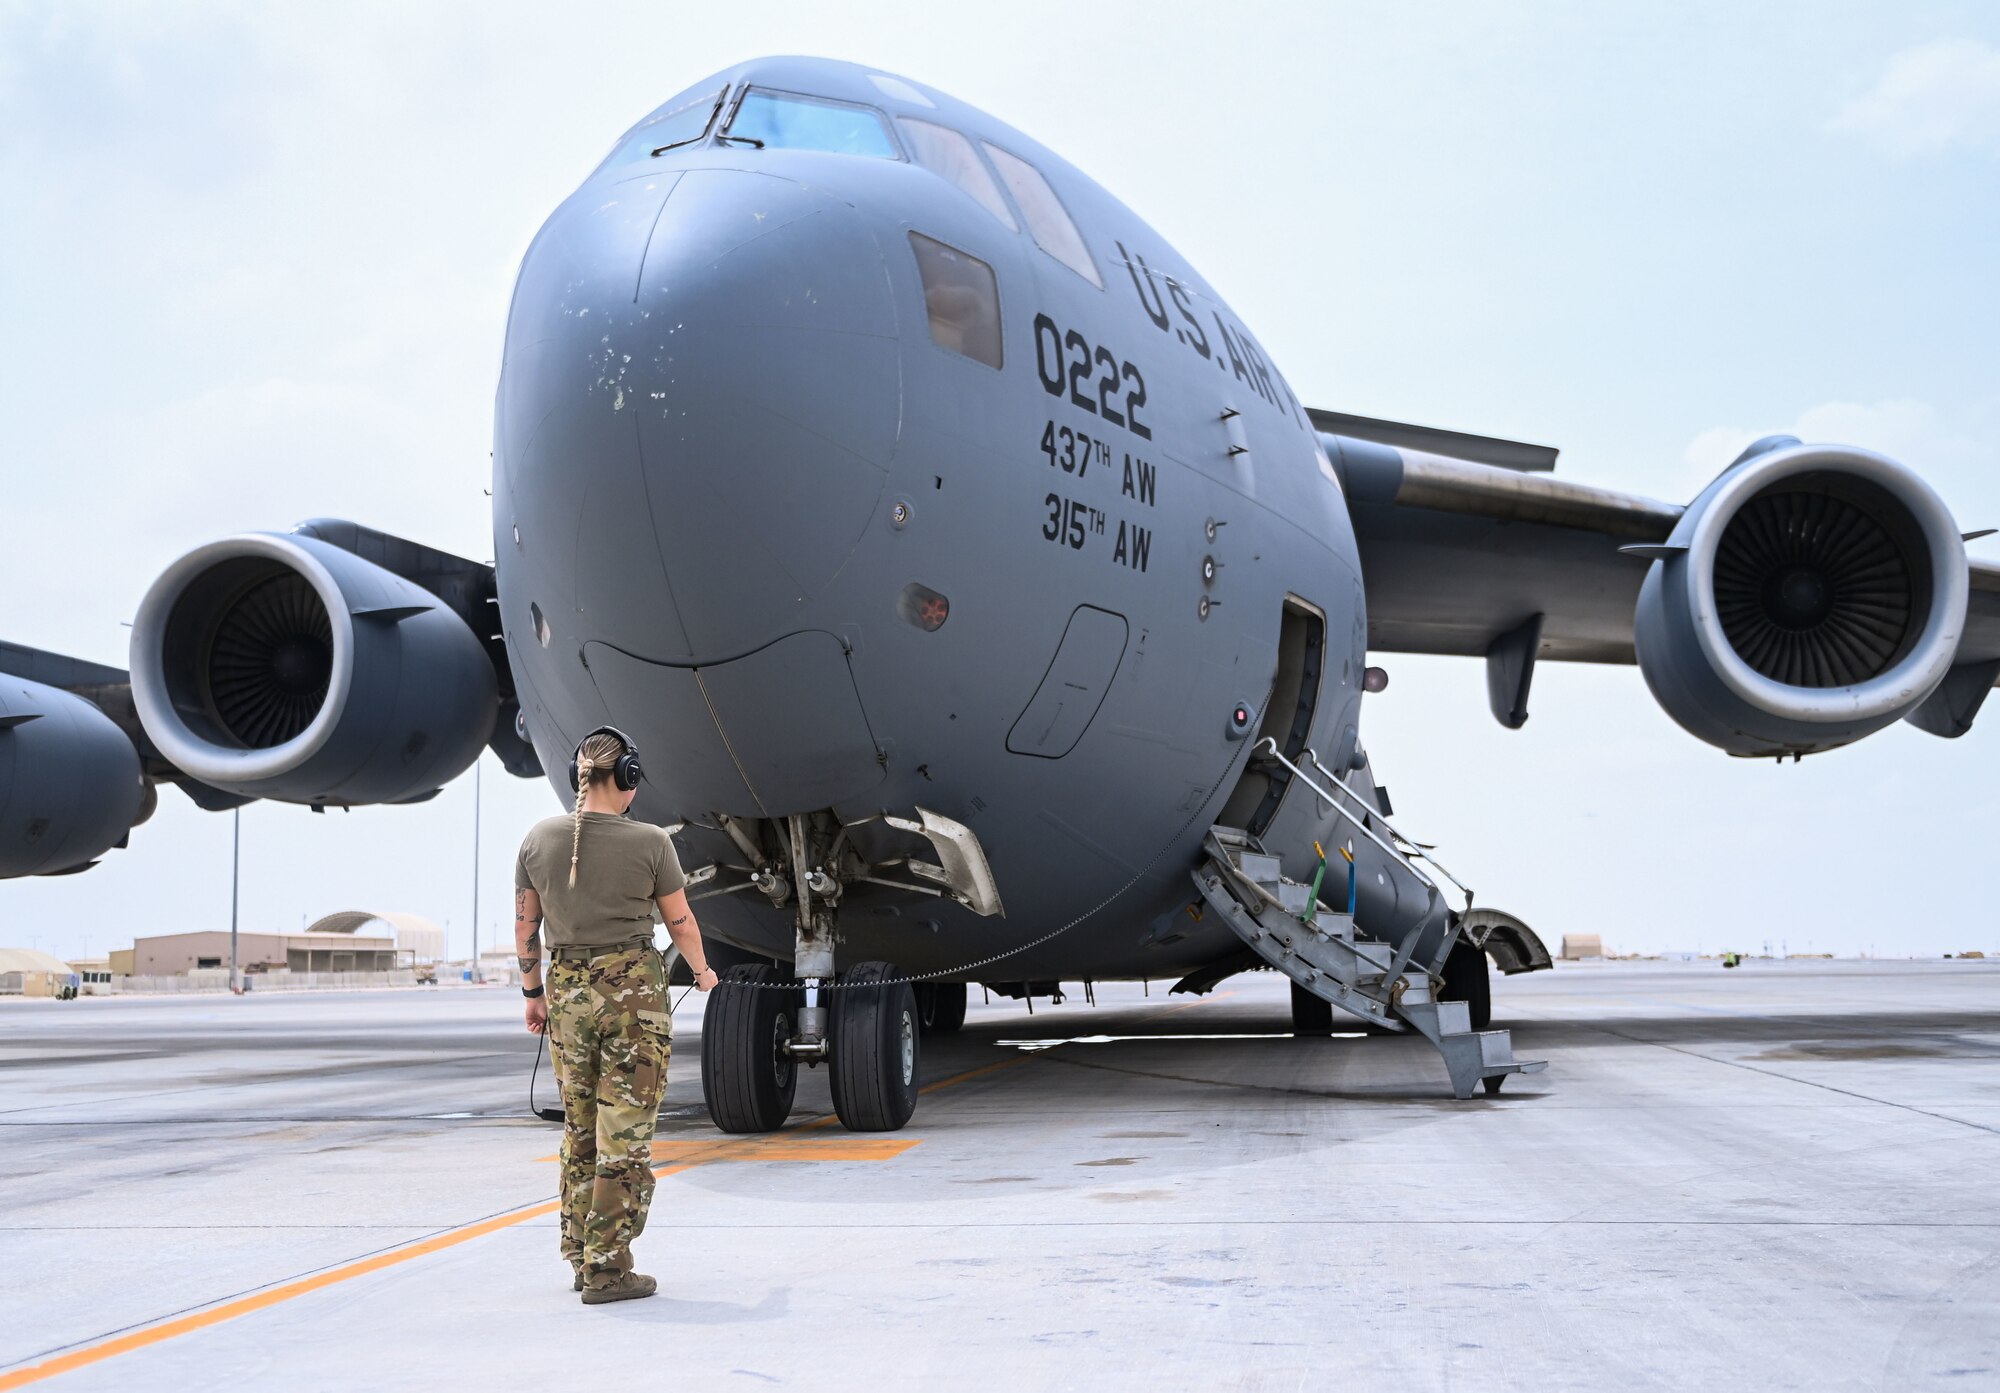 U.S. Air Force Airman 1st Class Mikaela Branchfield, an 816th Expeditionary Airlift Squadron loadmaster, communicates with pilots on board a C-17 Globemaster during a preflight check July 12, 2022 at Al Udeid Air Base, Qatar. C-17 aircraft can perform tactical airlift and airdrop missions and can transport litters and ambulatory patients during aeromedical evacuations. (U.S. Air National Guard photo by Tech. Sgt. Michael J. Kelly)